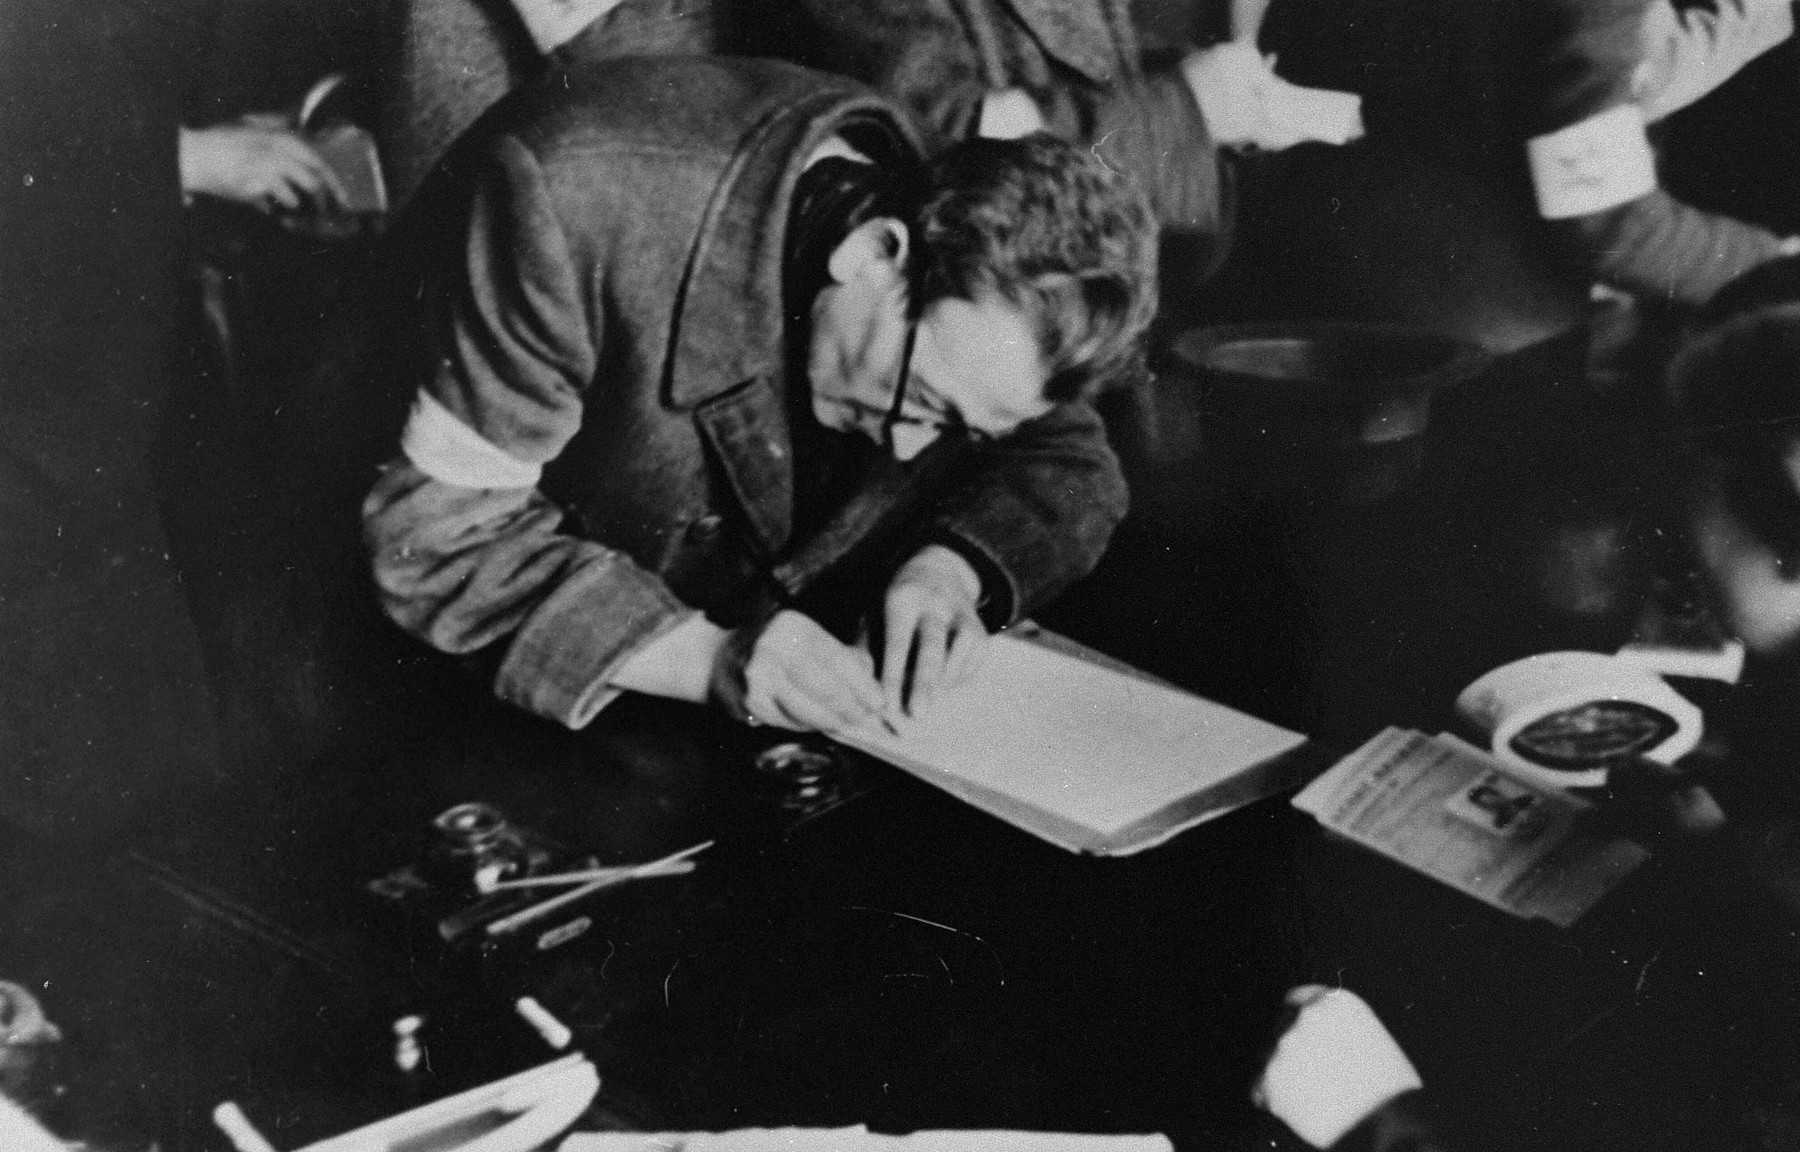 A Jew fills out a form to obtain an identification card in one of the ghetto offices.